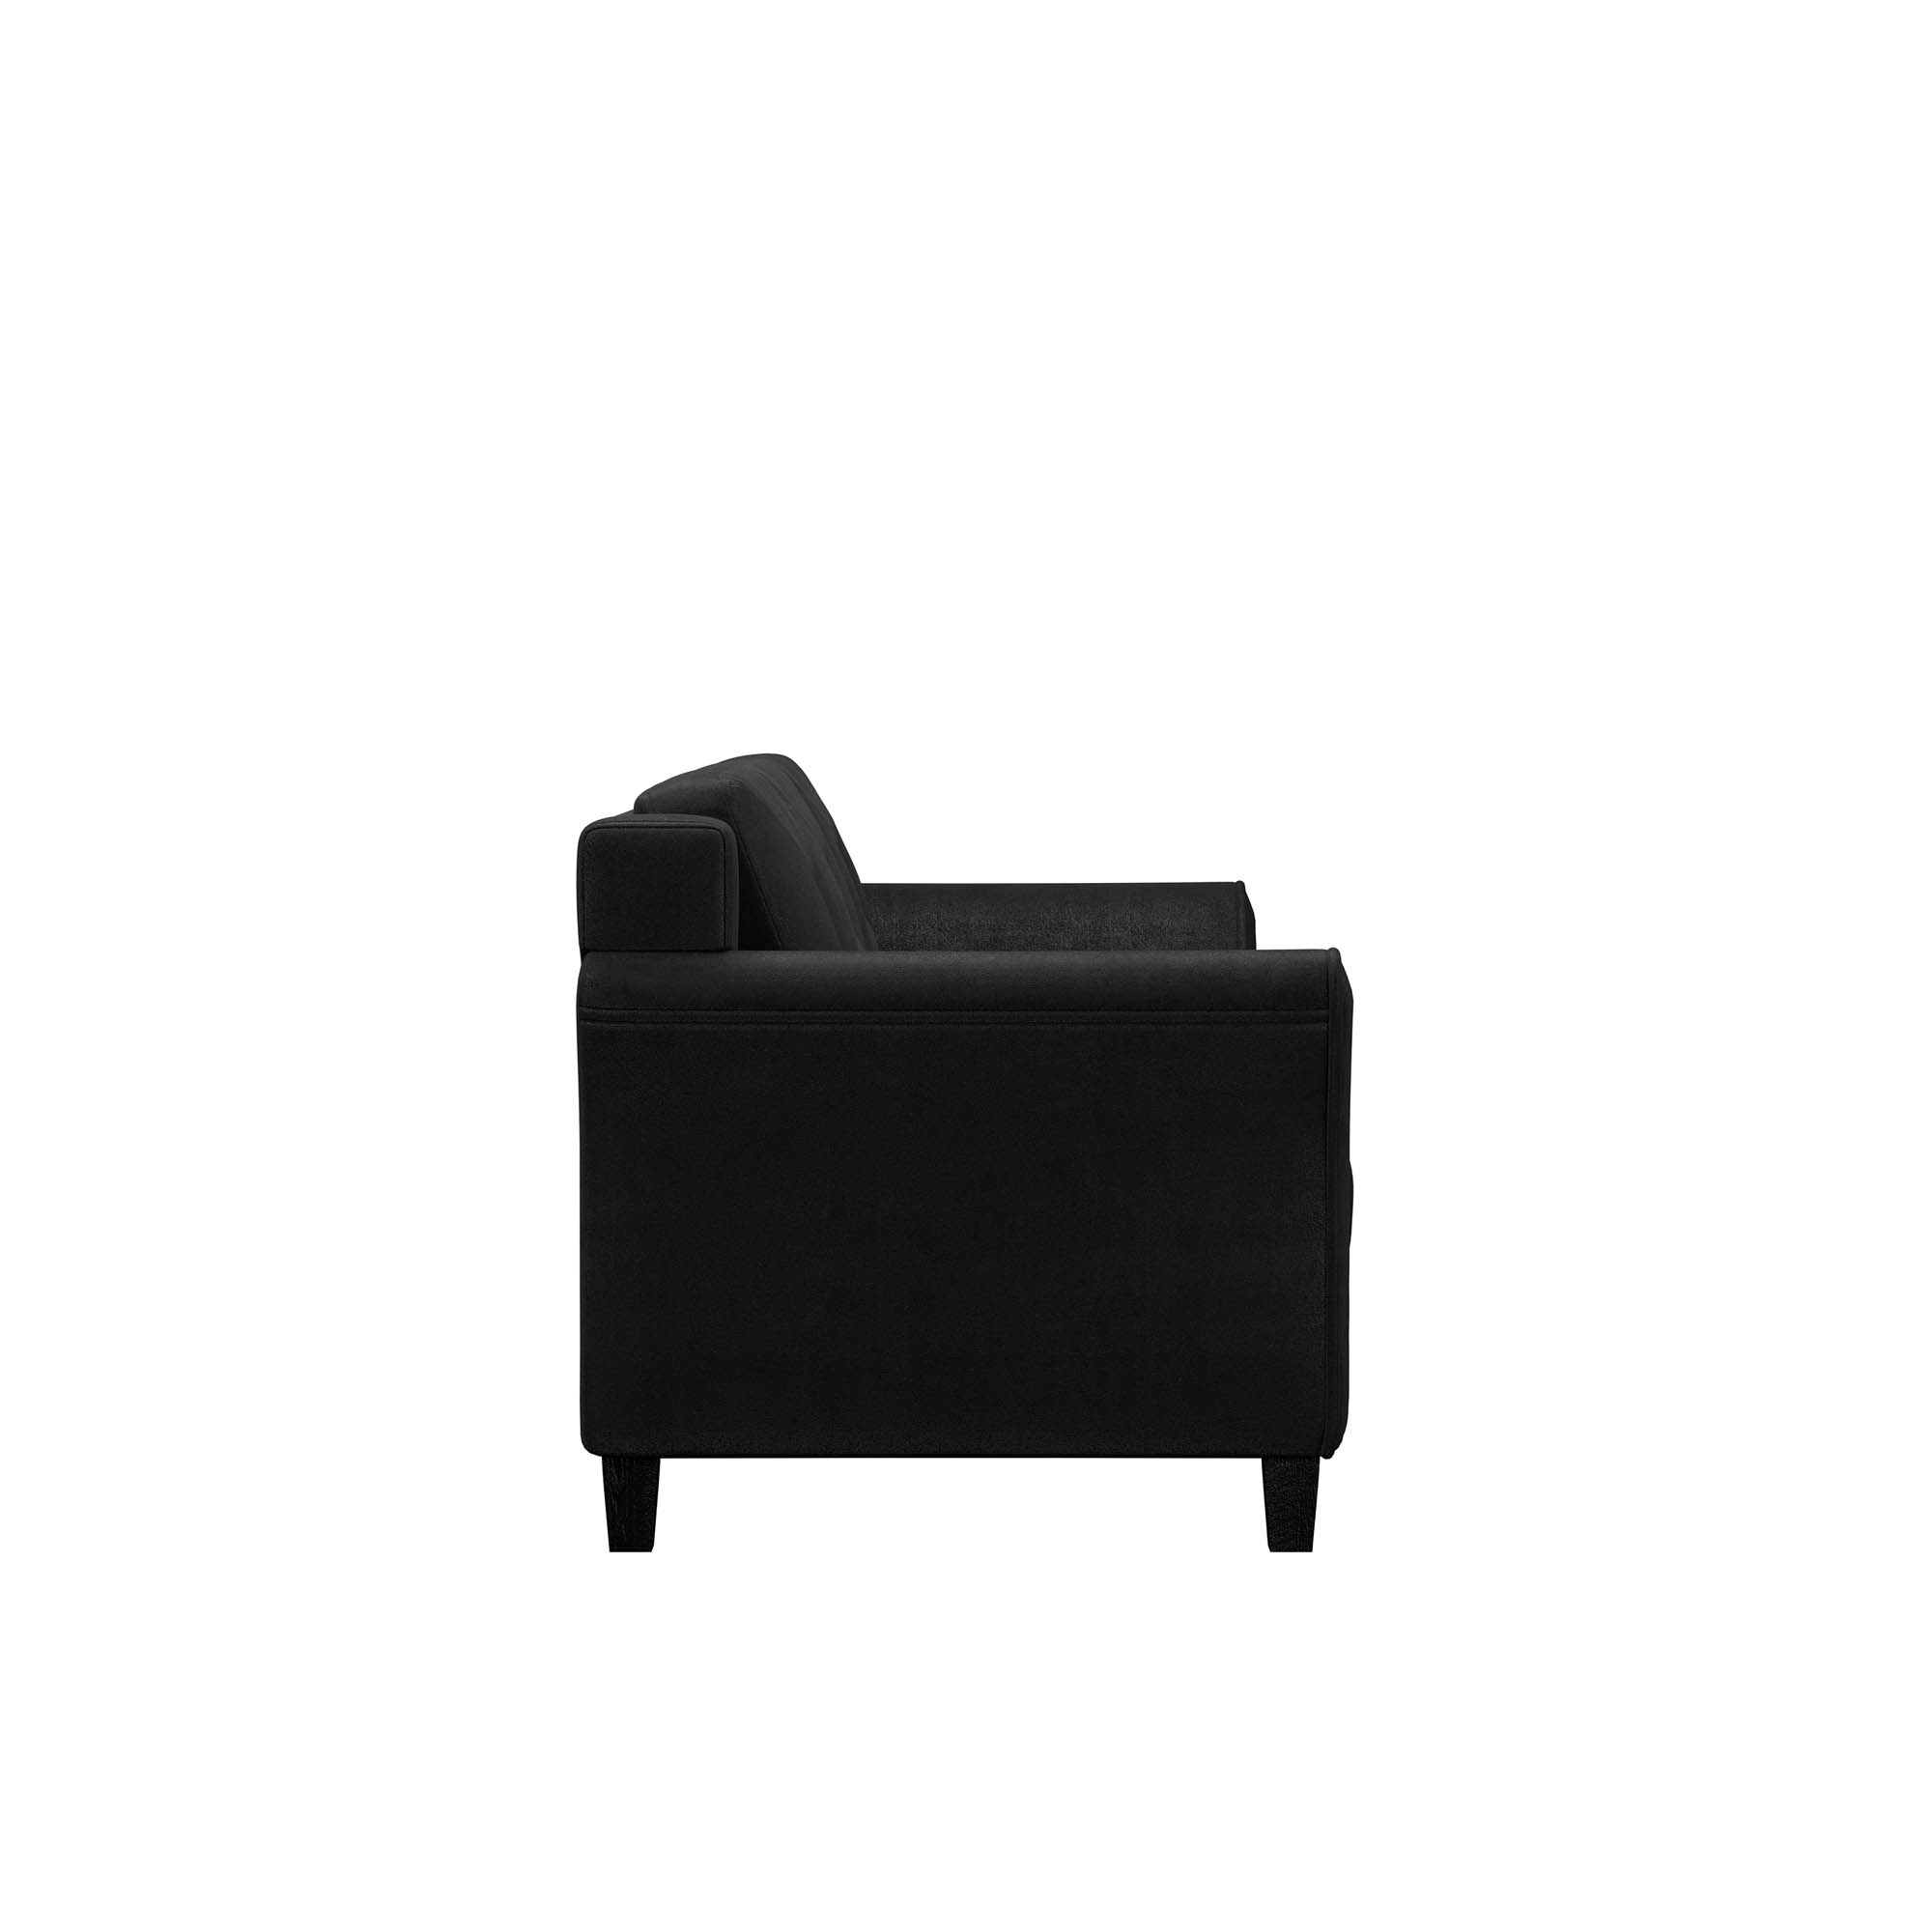 Lifestyle Solutions Taryn Curved Arms Sofa, Black Fabric - image 5 of 18